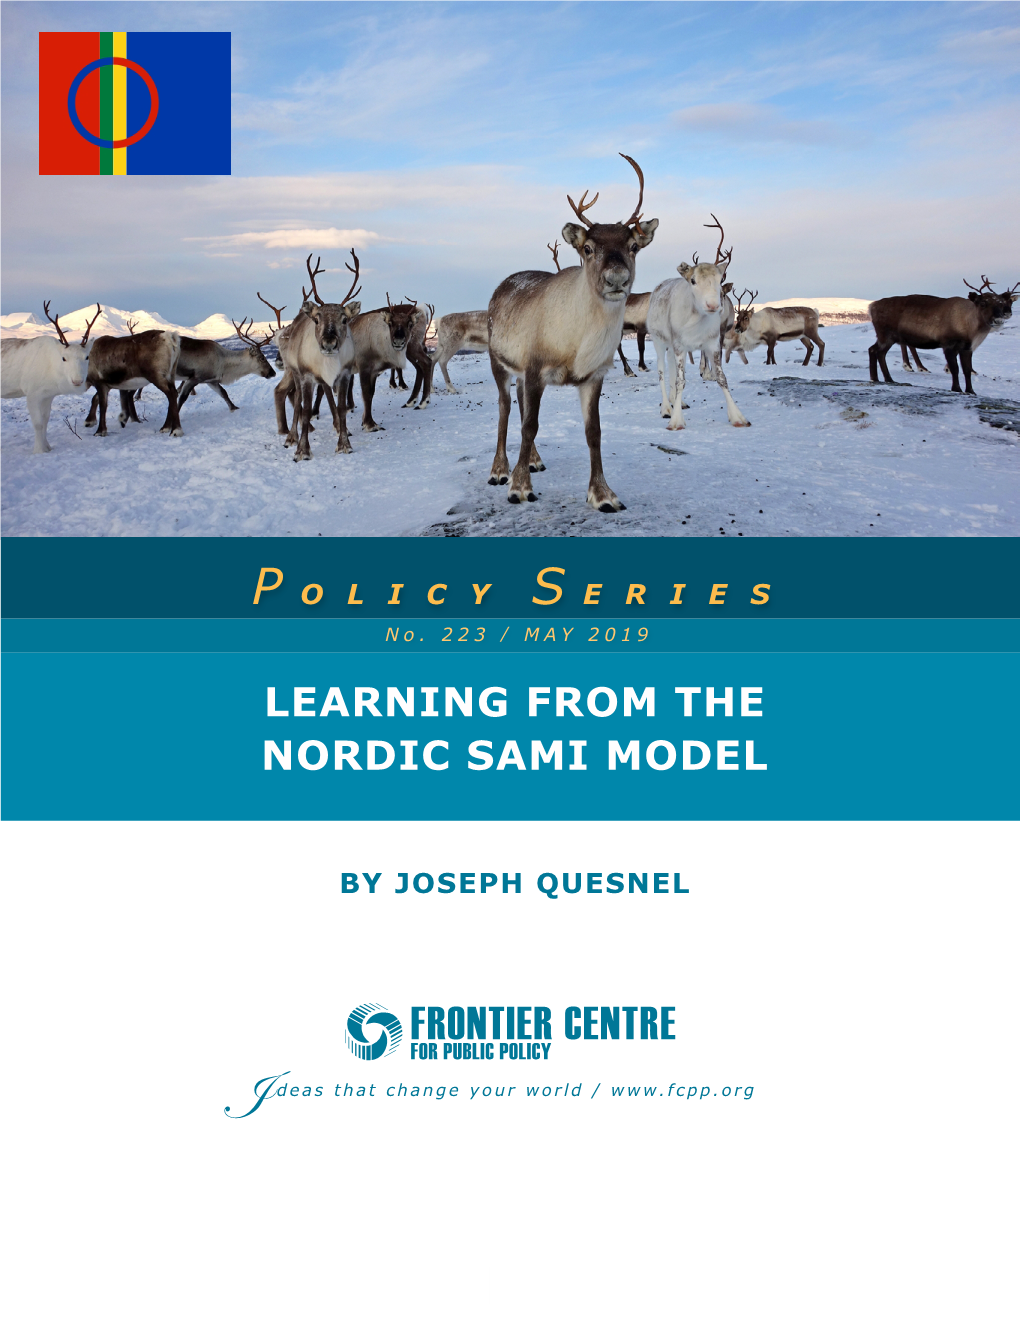 Learning from the Nordic Sami Model by Joseph